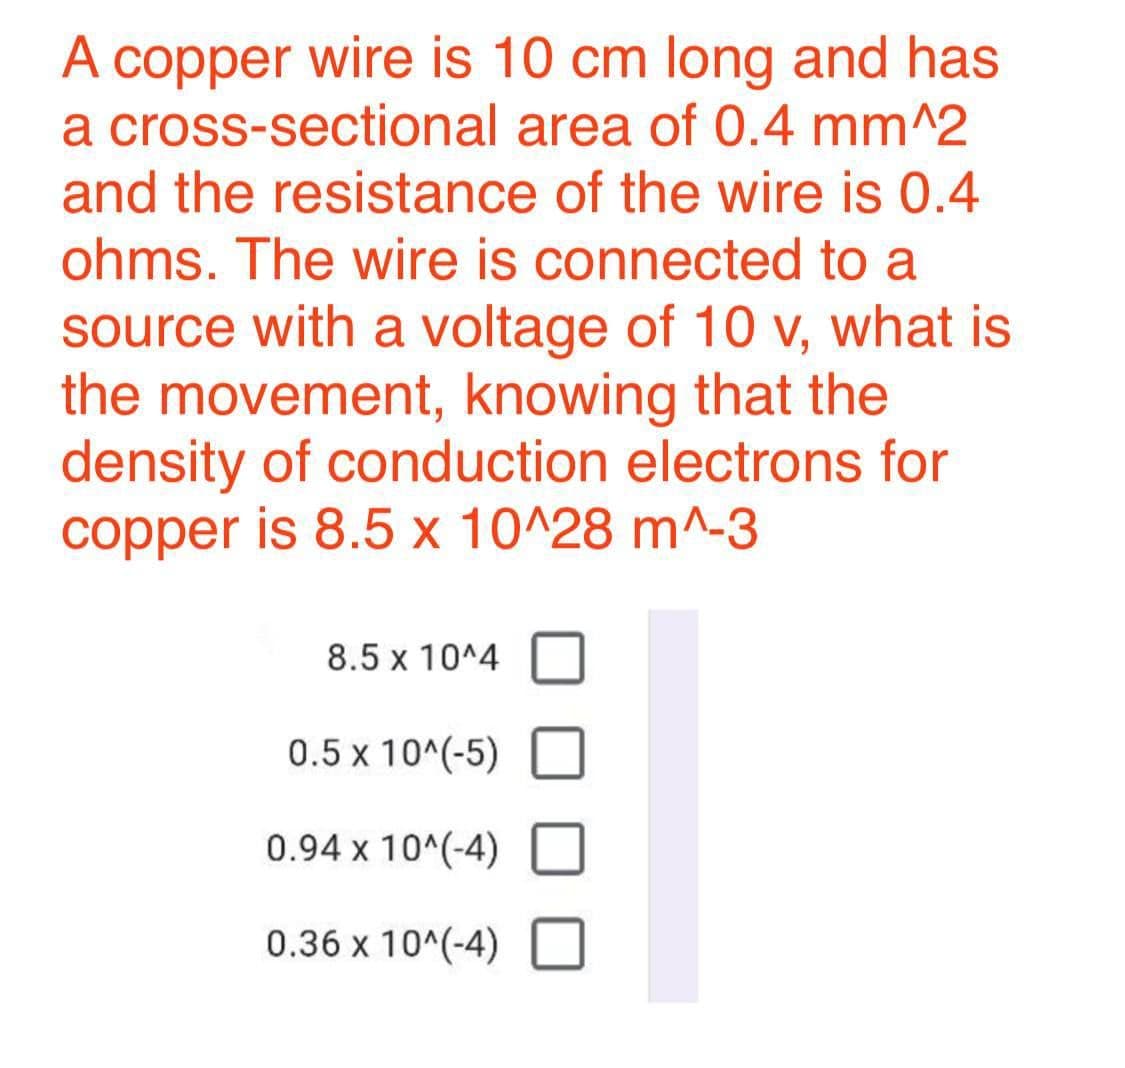 copper wire is 10 cm long and has
a cross-sectional area of 0.4 mm^2
and the resistance of the wire is 0.4
A
ohms. The wire is connected to a
source with a voltage of 10 v, what is
the movement, knowing that the
density of conduction electrons for
copper is 8.5 x 10^28 m^-3
8.5 x 10^4
0.5 x 10^(-5)
0.94 x 10^(-4)
0.36 x 10^(-4) O
